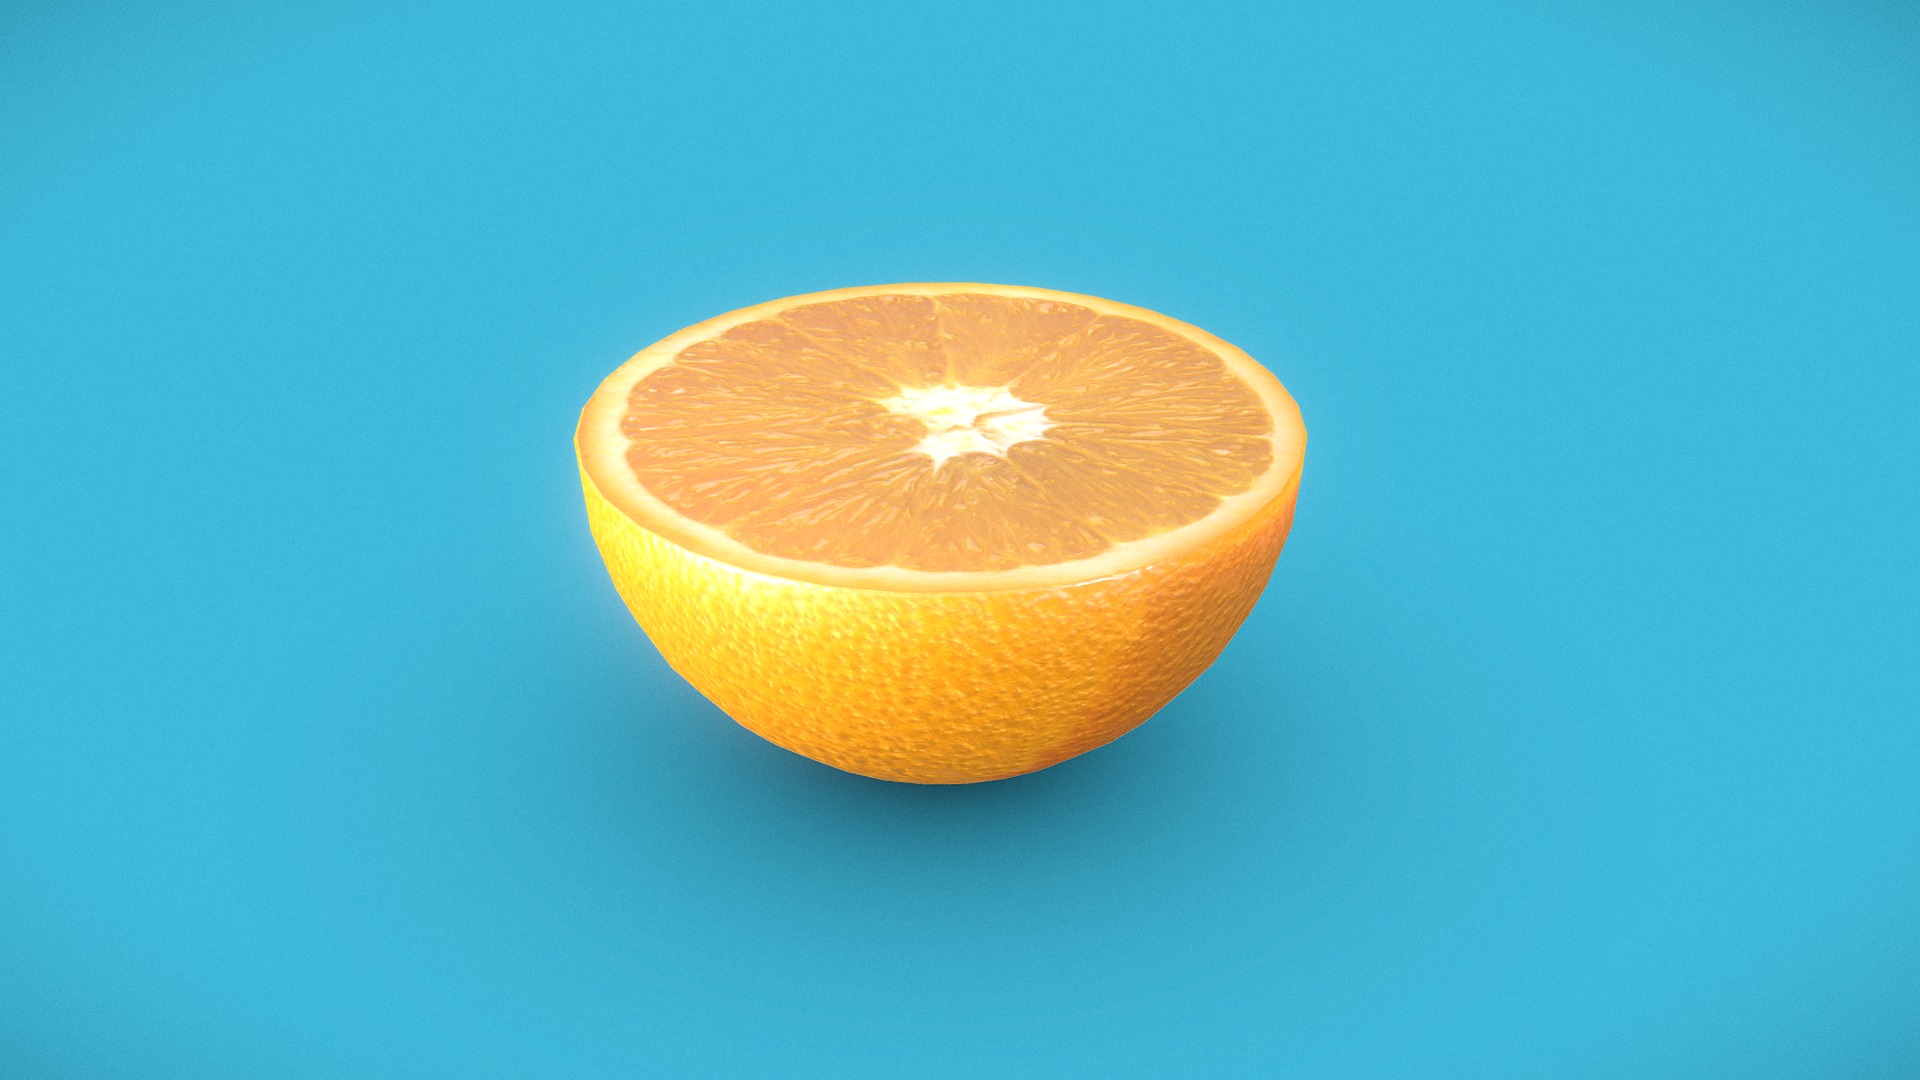 3D model Half an Orange - This is a 3D model of the Half an Orange. The 3D model is about an orange with a white center.